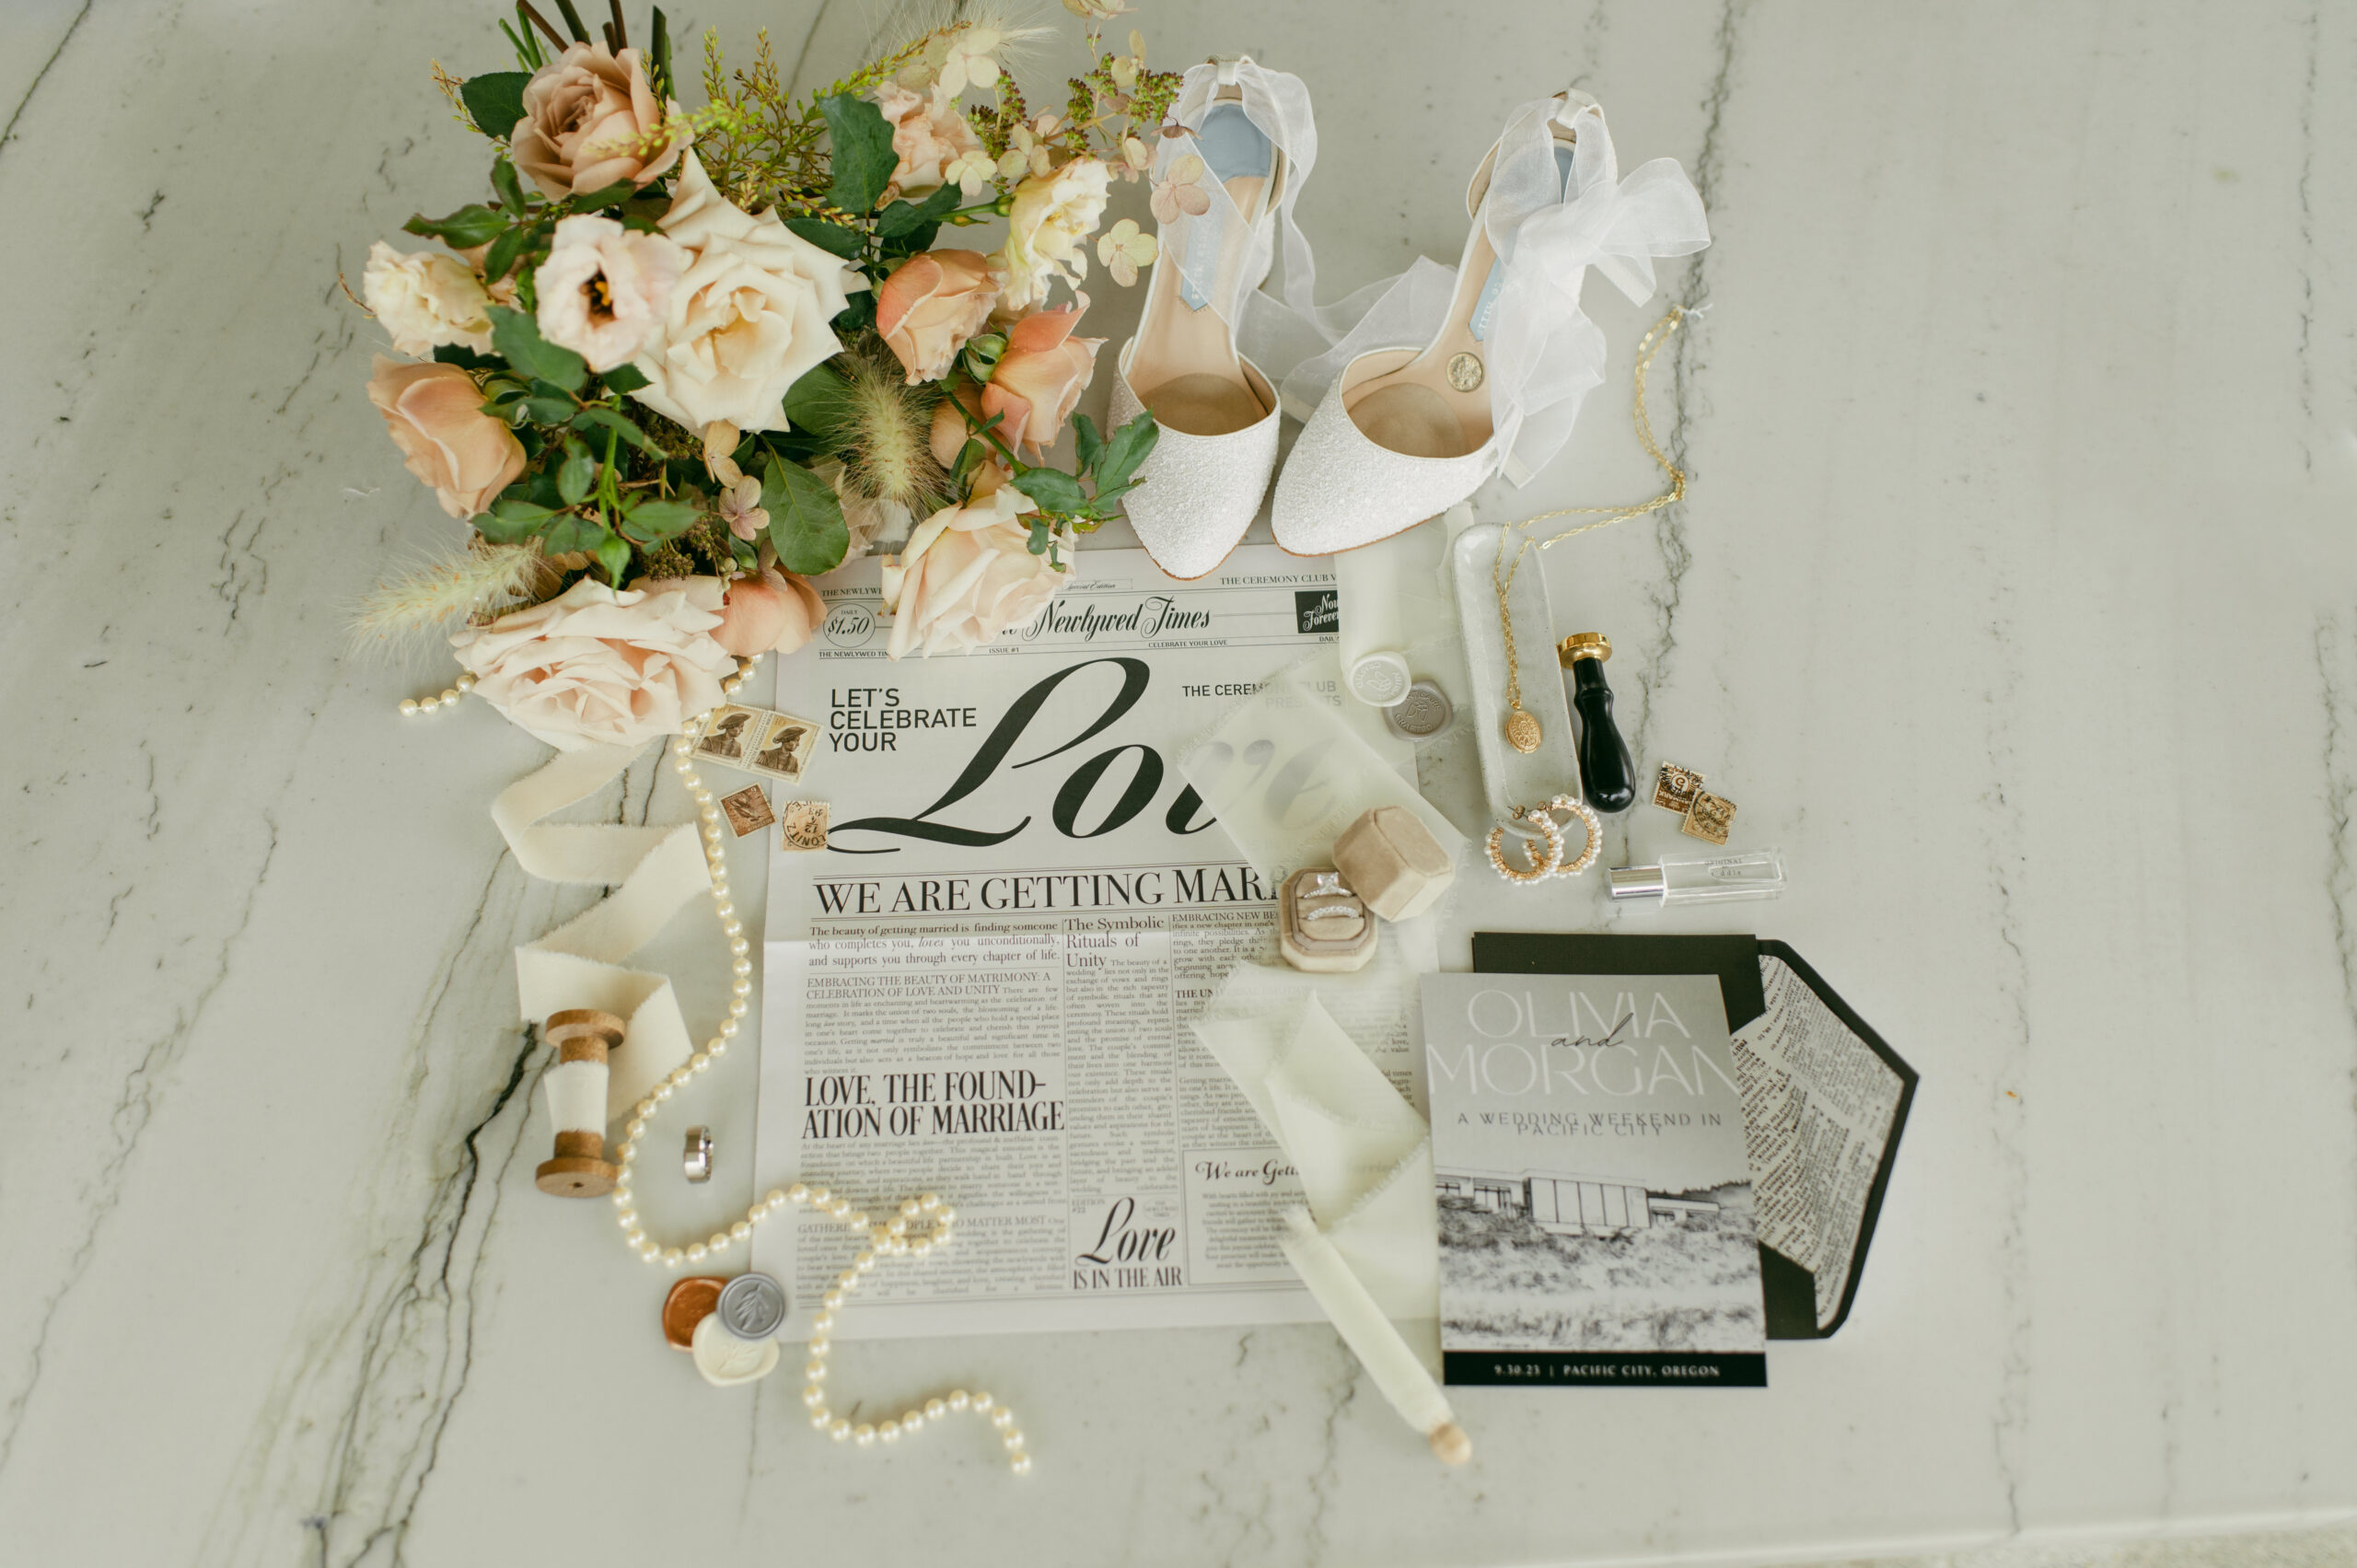 a wedding details shot with wedding shoes, invitation suite, newspaper, flowers and jewelry.